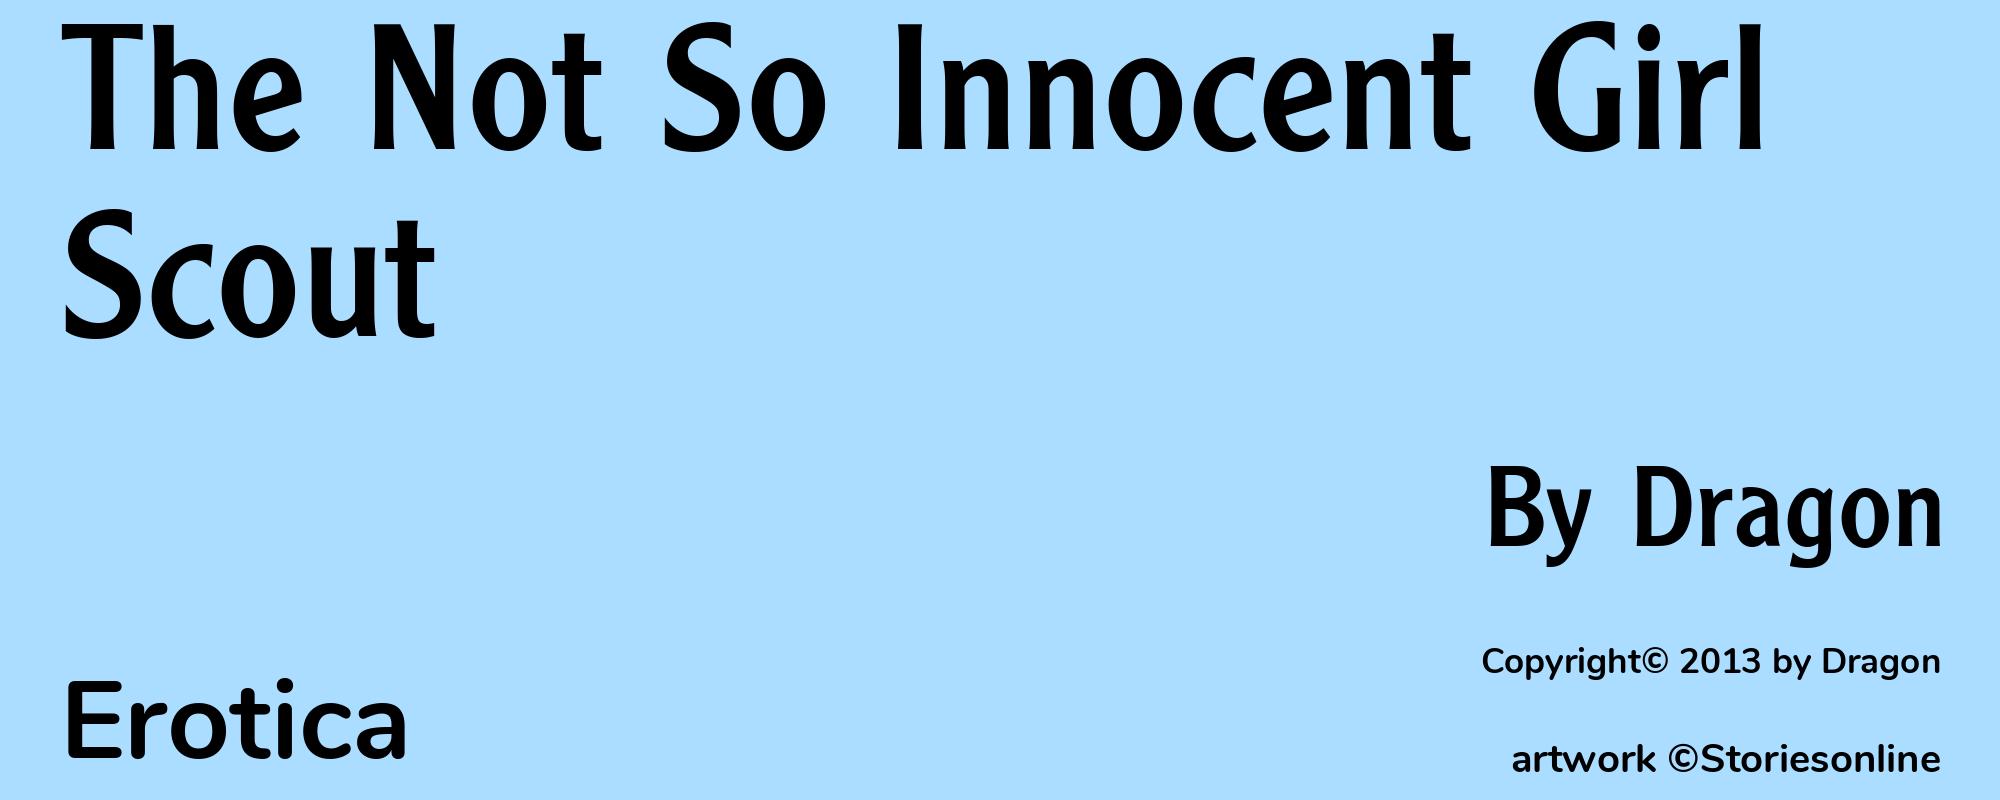 The Not So Innocent Girl Scout - Cover